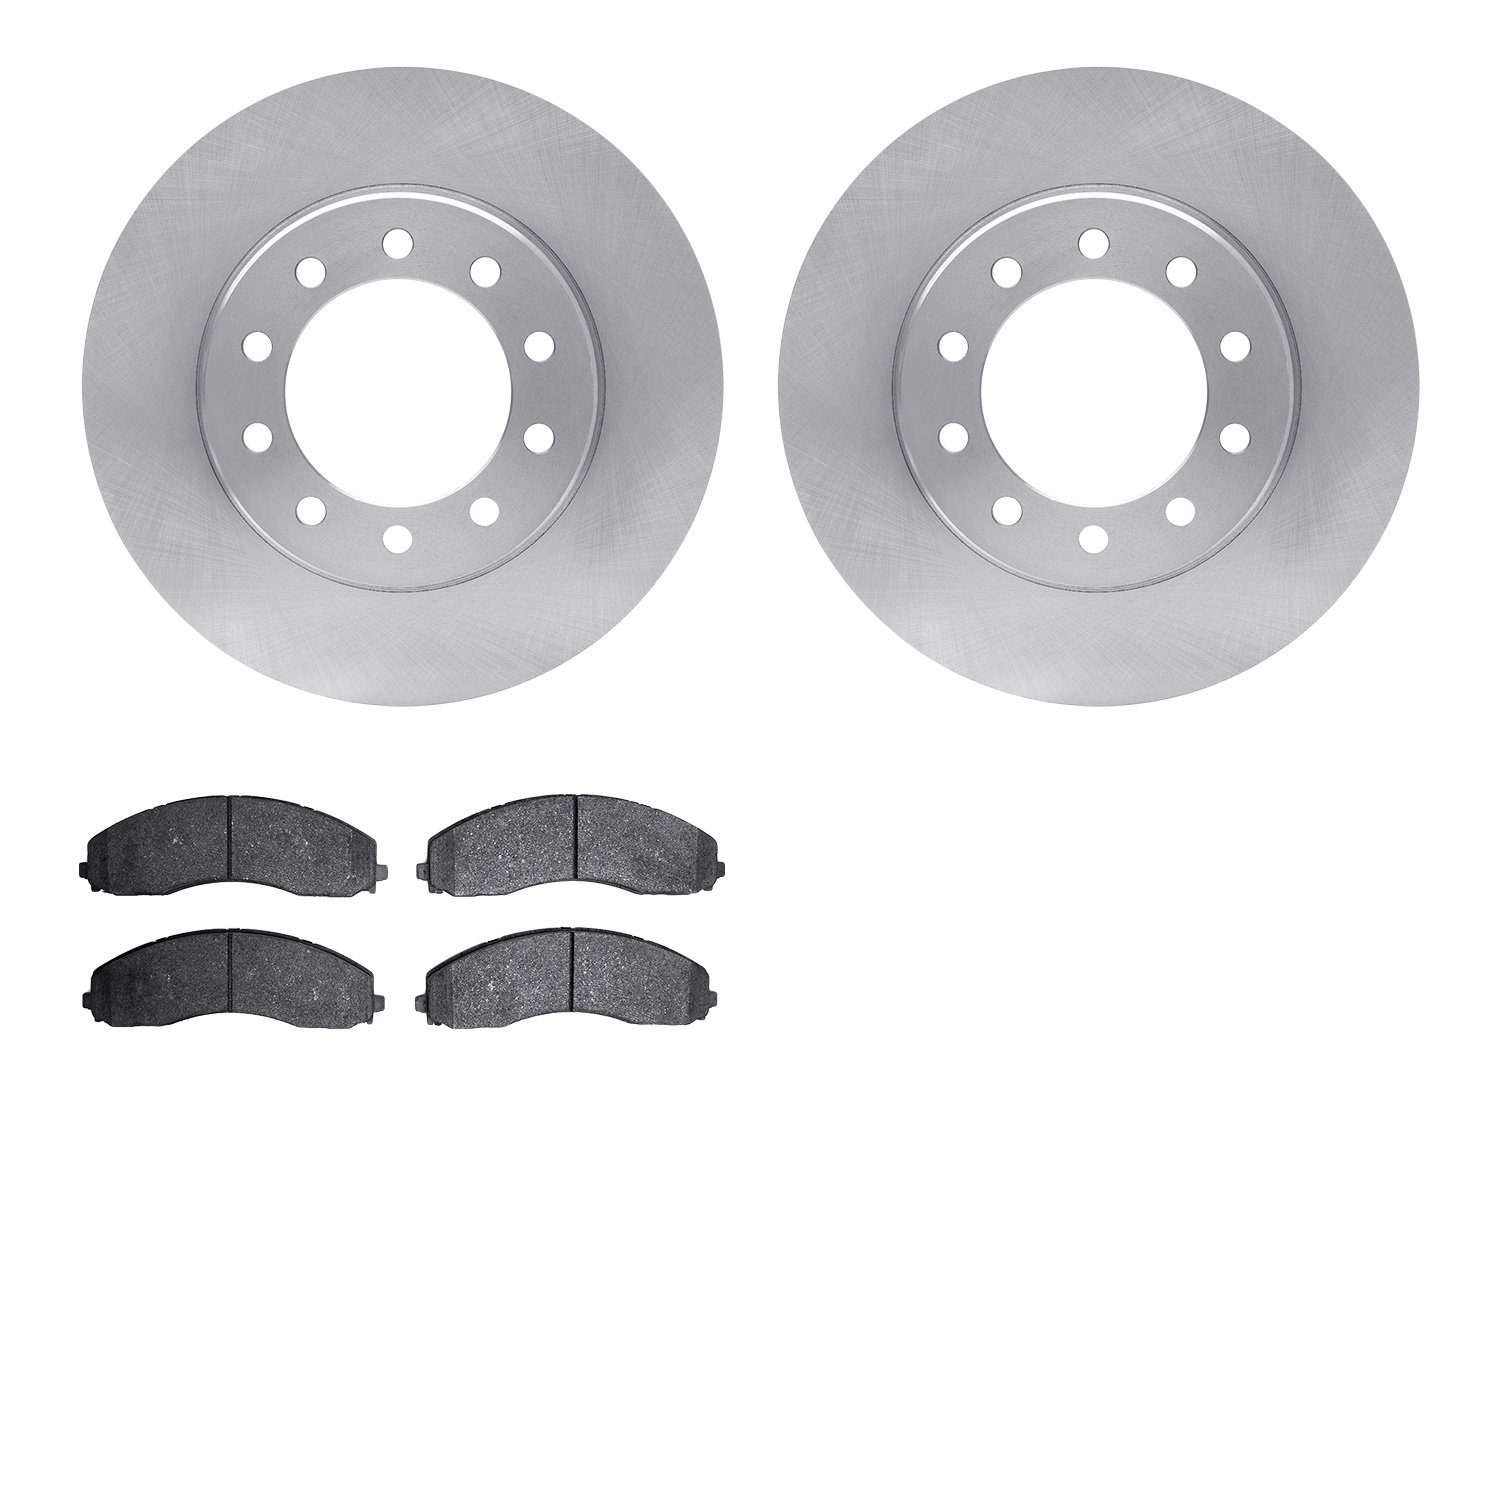 6502-99759 Brake Rotors w/5000 Advanced Brake Pads Kit, Fits Select Ford/Lincoln/Mercury/Mazda, Position: Front